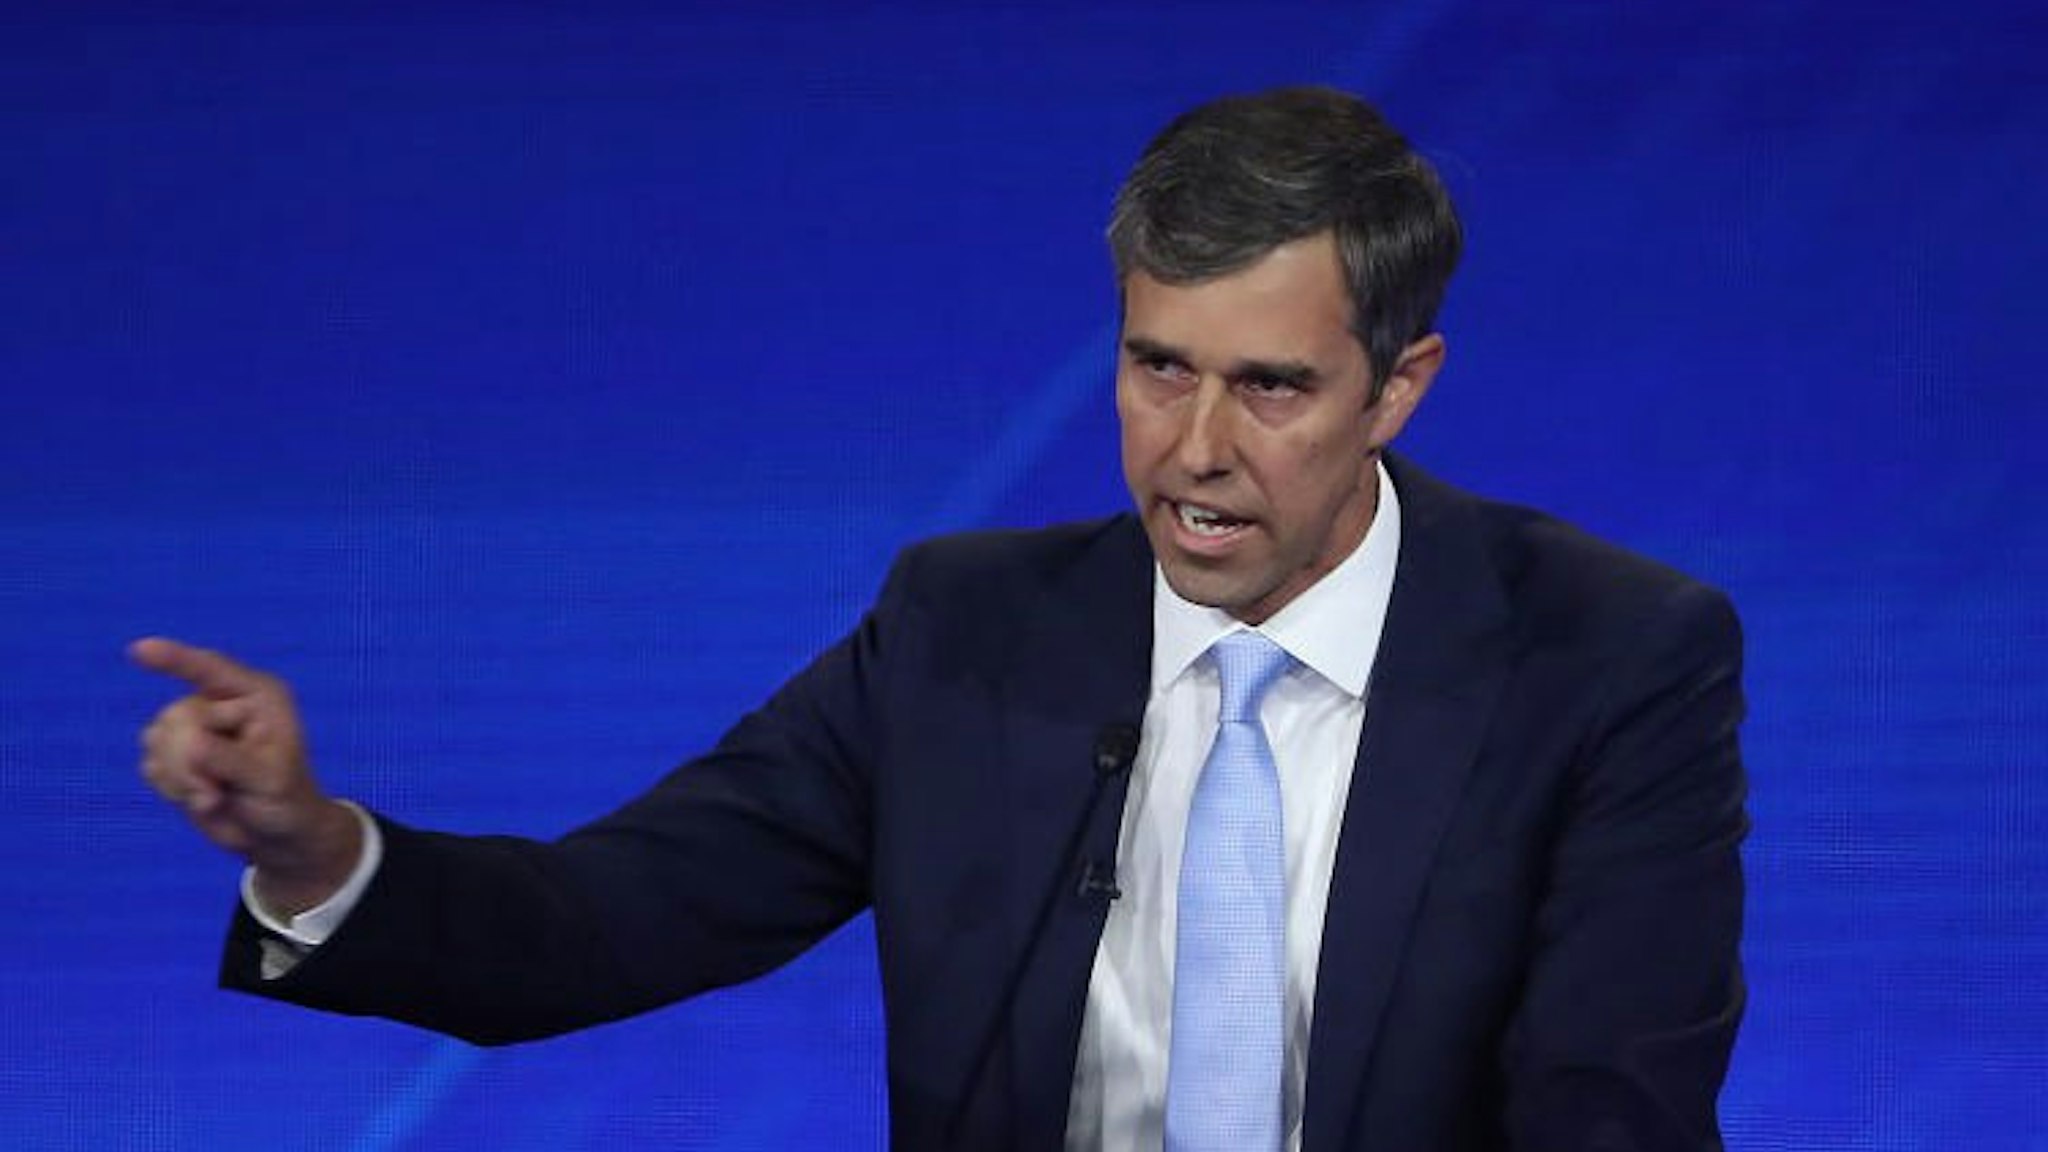 Democratic presidential candidate former Texas congressman Beto O'Rourke speaks during the Democratic Presidential Debate at Texas Southern University's Health and PE Center on September 12, 2019 in Houston, Texas.